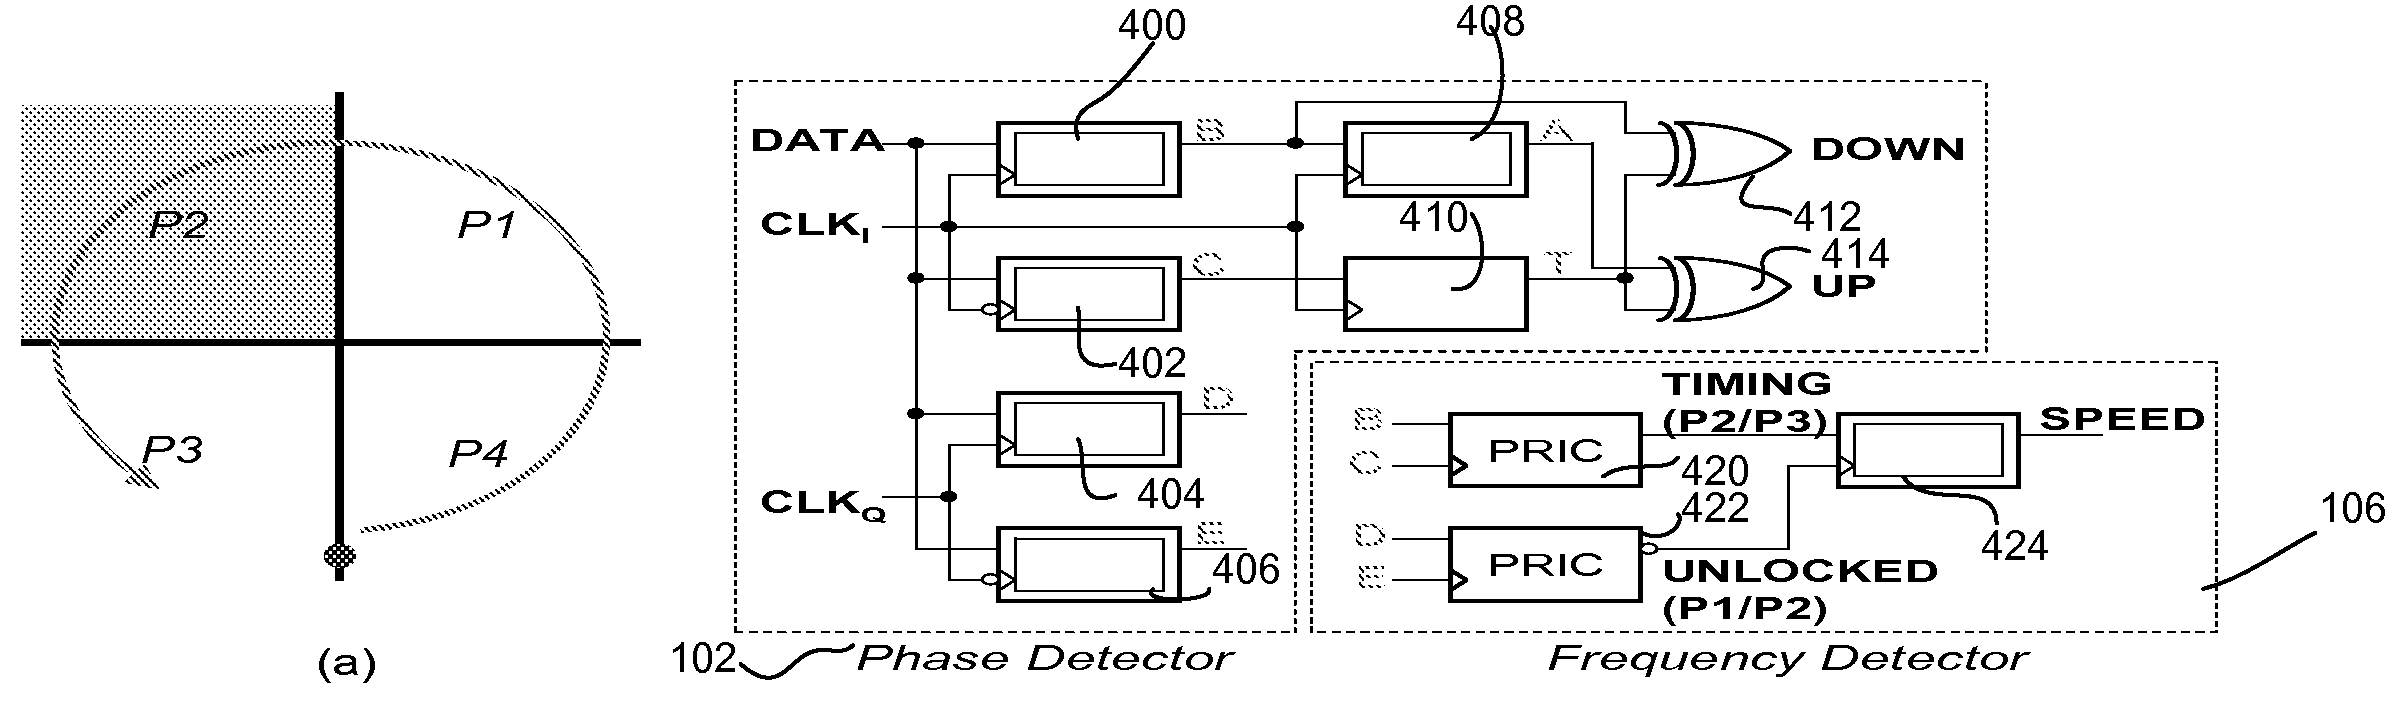 Phase/frequency detector and charge pump architecture for referenceless clock and data recovery (CDR) applications